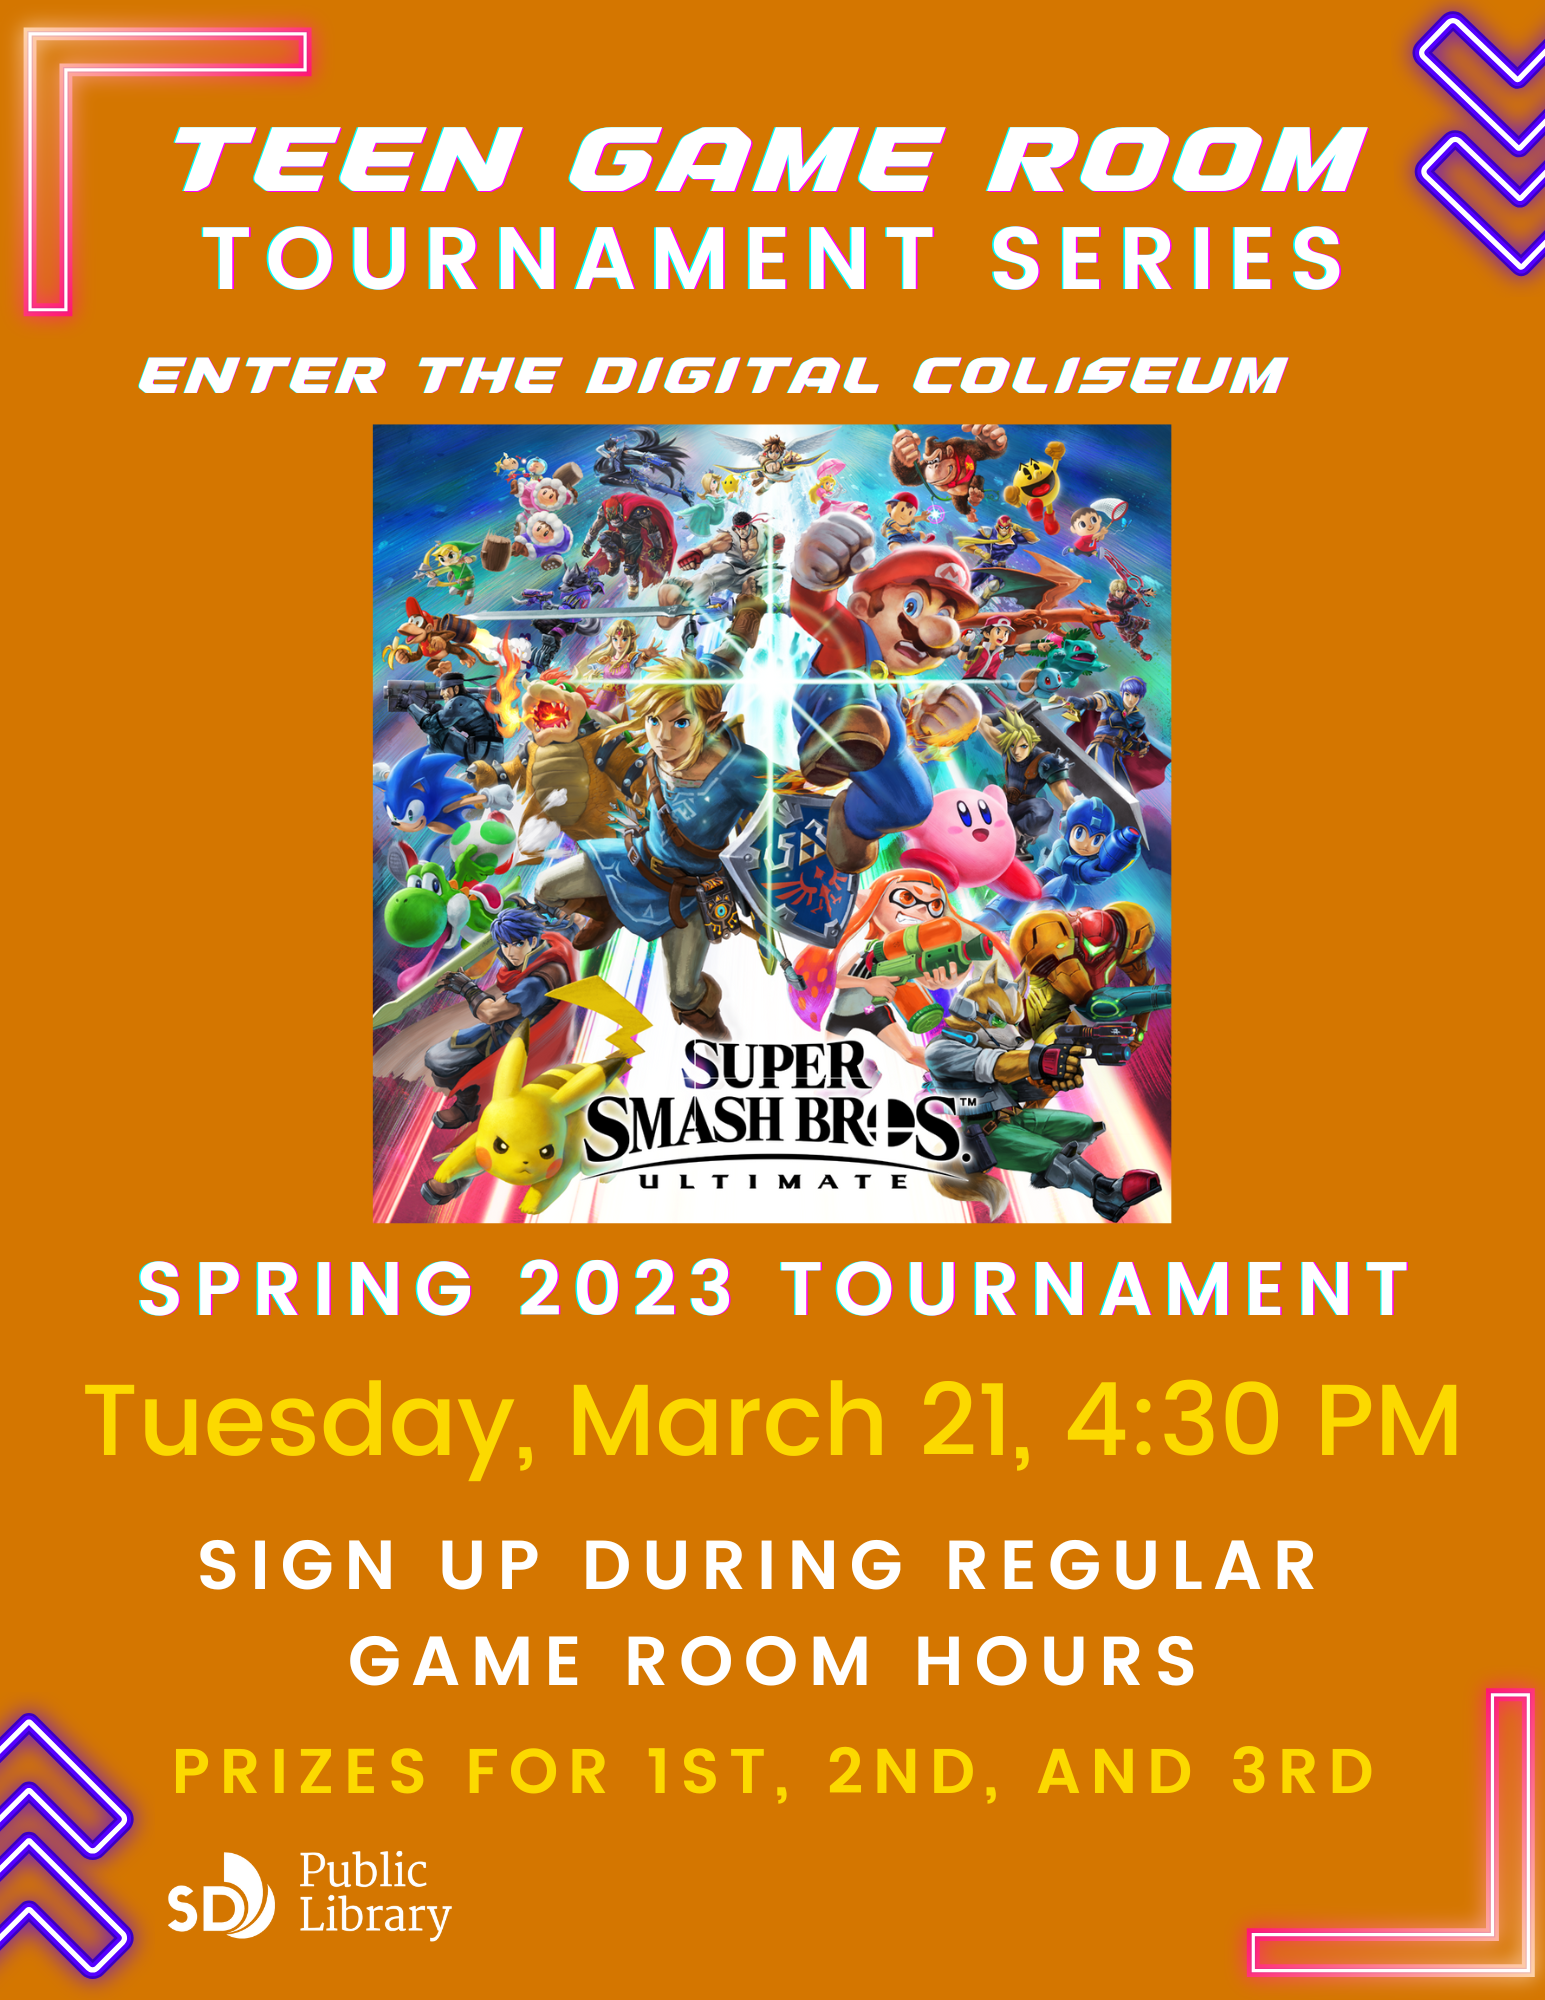 Teen Game Room Tournament Series. Enter the digital coliseum. Super Smash Bros Ultimate Spring 2023 Tournament. Tuesday, March 21, 4:30pm. Sign up during regular game room hours (Monday-Thursday, 4 PM to 5:45 PM.